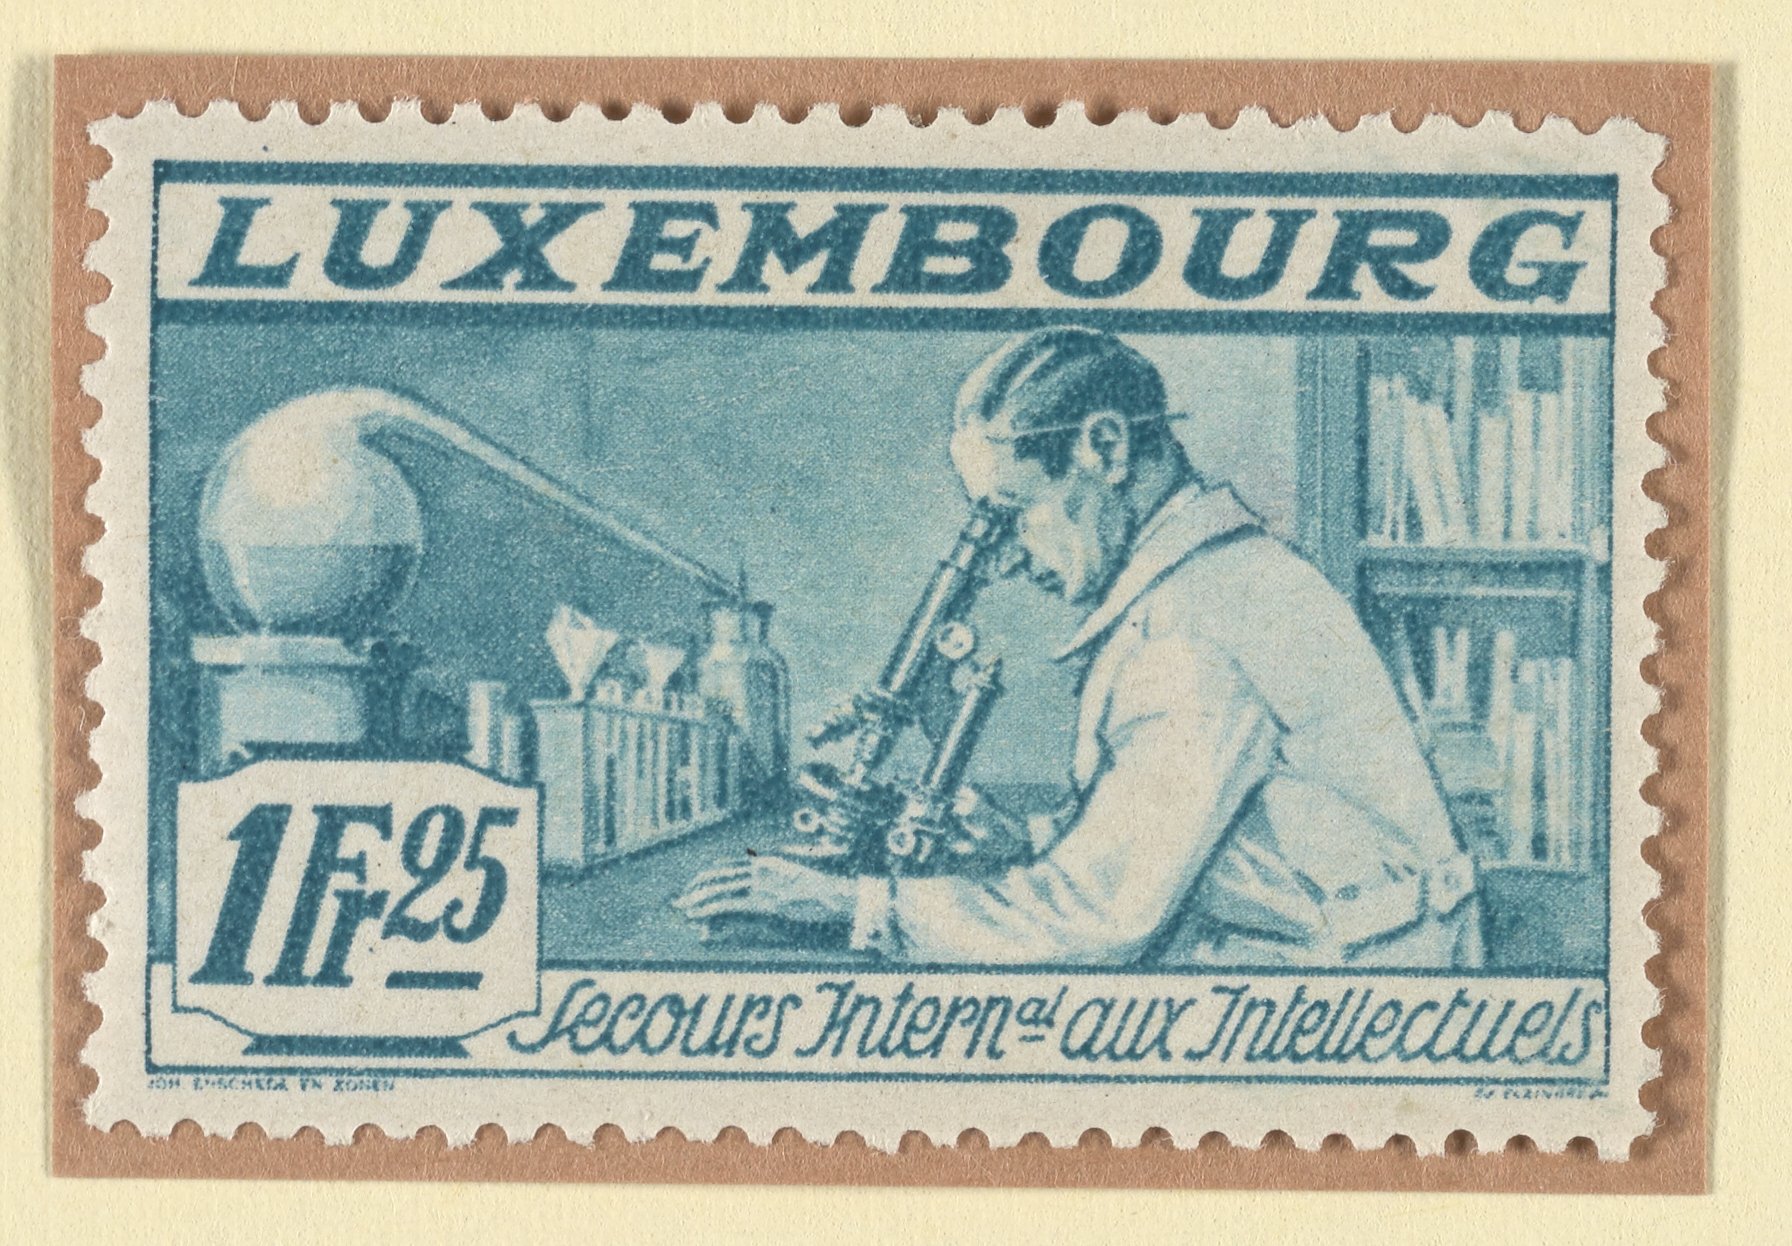 Semipostal stamp from Luxembourg to support the International Relief Fund  for Intellectuals - Science History Institute Digital Collections